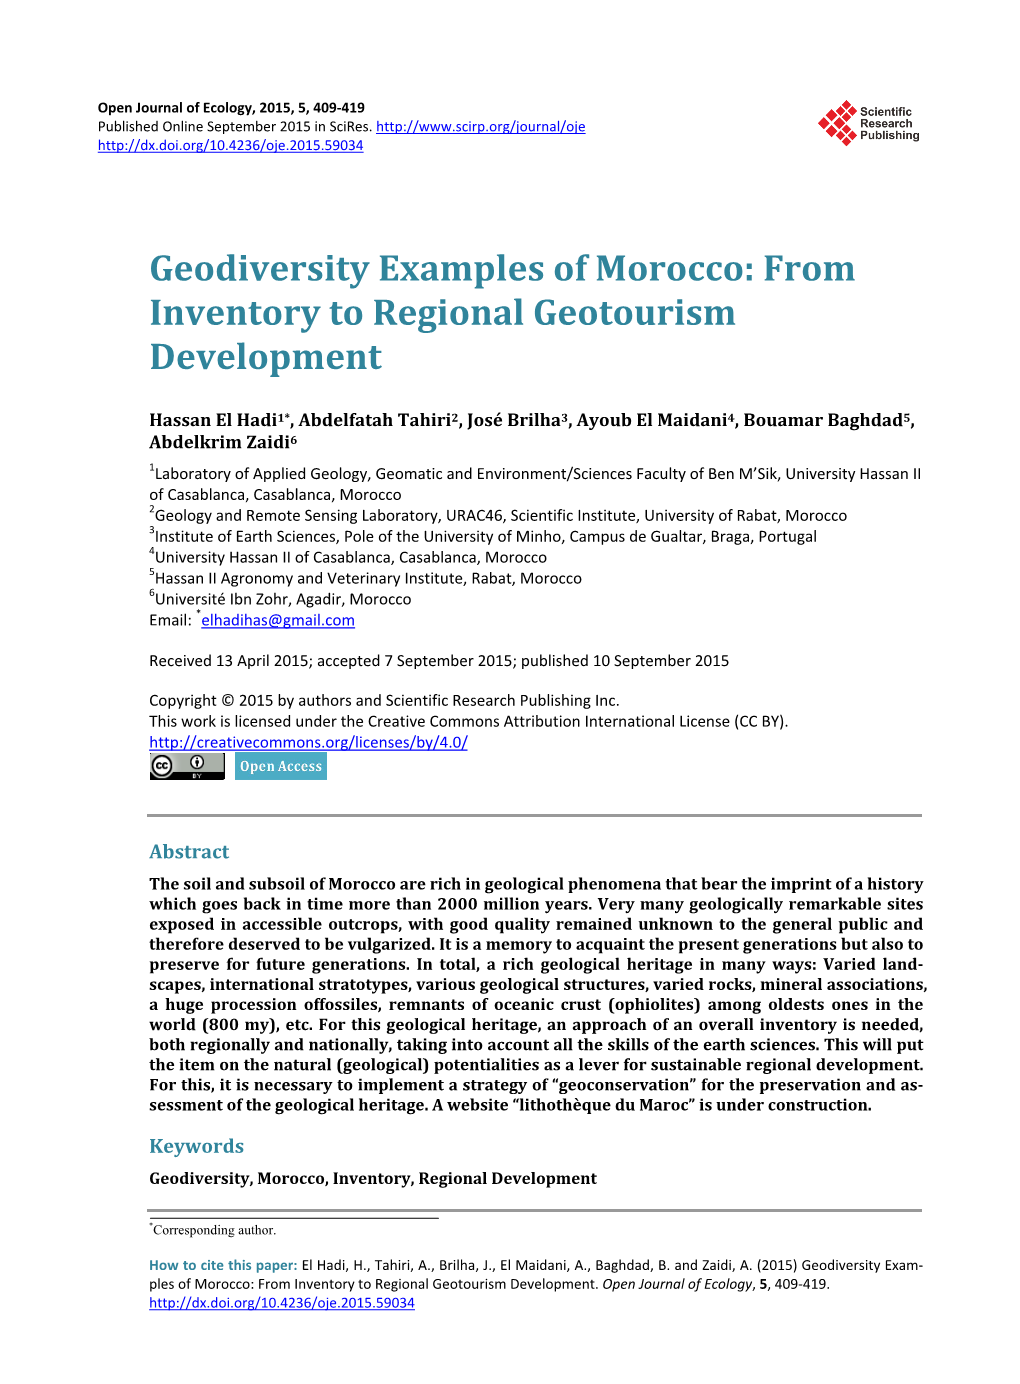 Geodiversity Examples of Morocco: from Inventory to Regional Geotourism Development